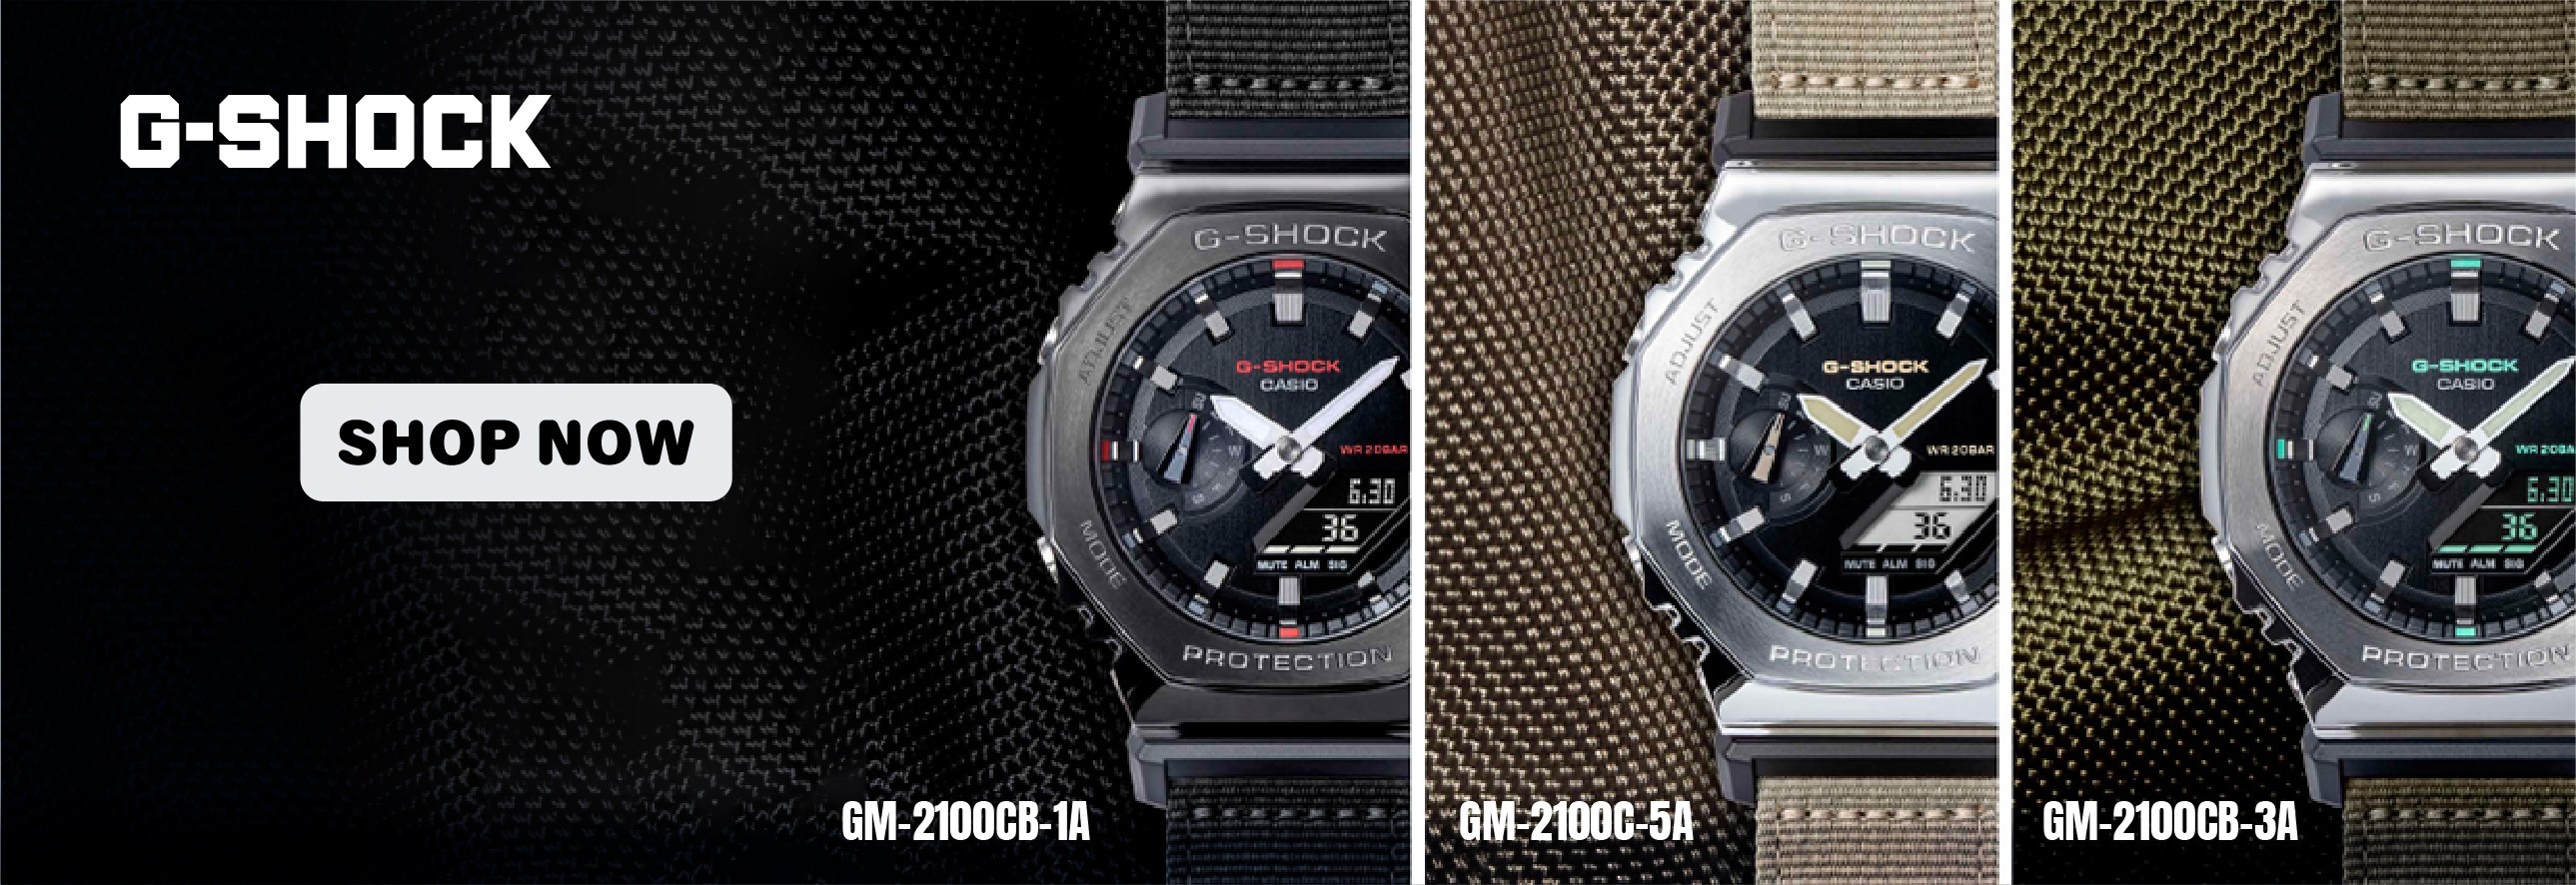 Get impressed by the CASIO G-SHOCK Utility Metal Watches collection 